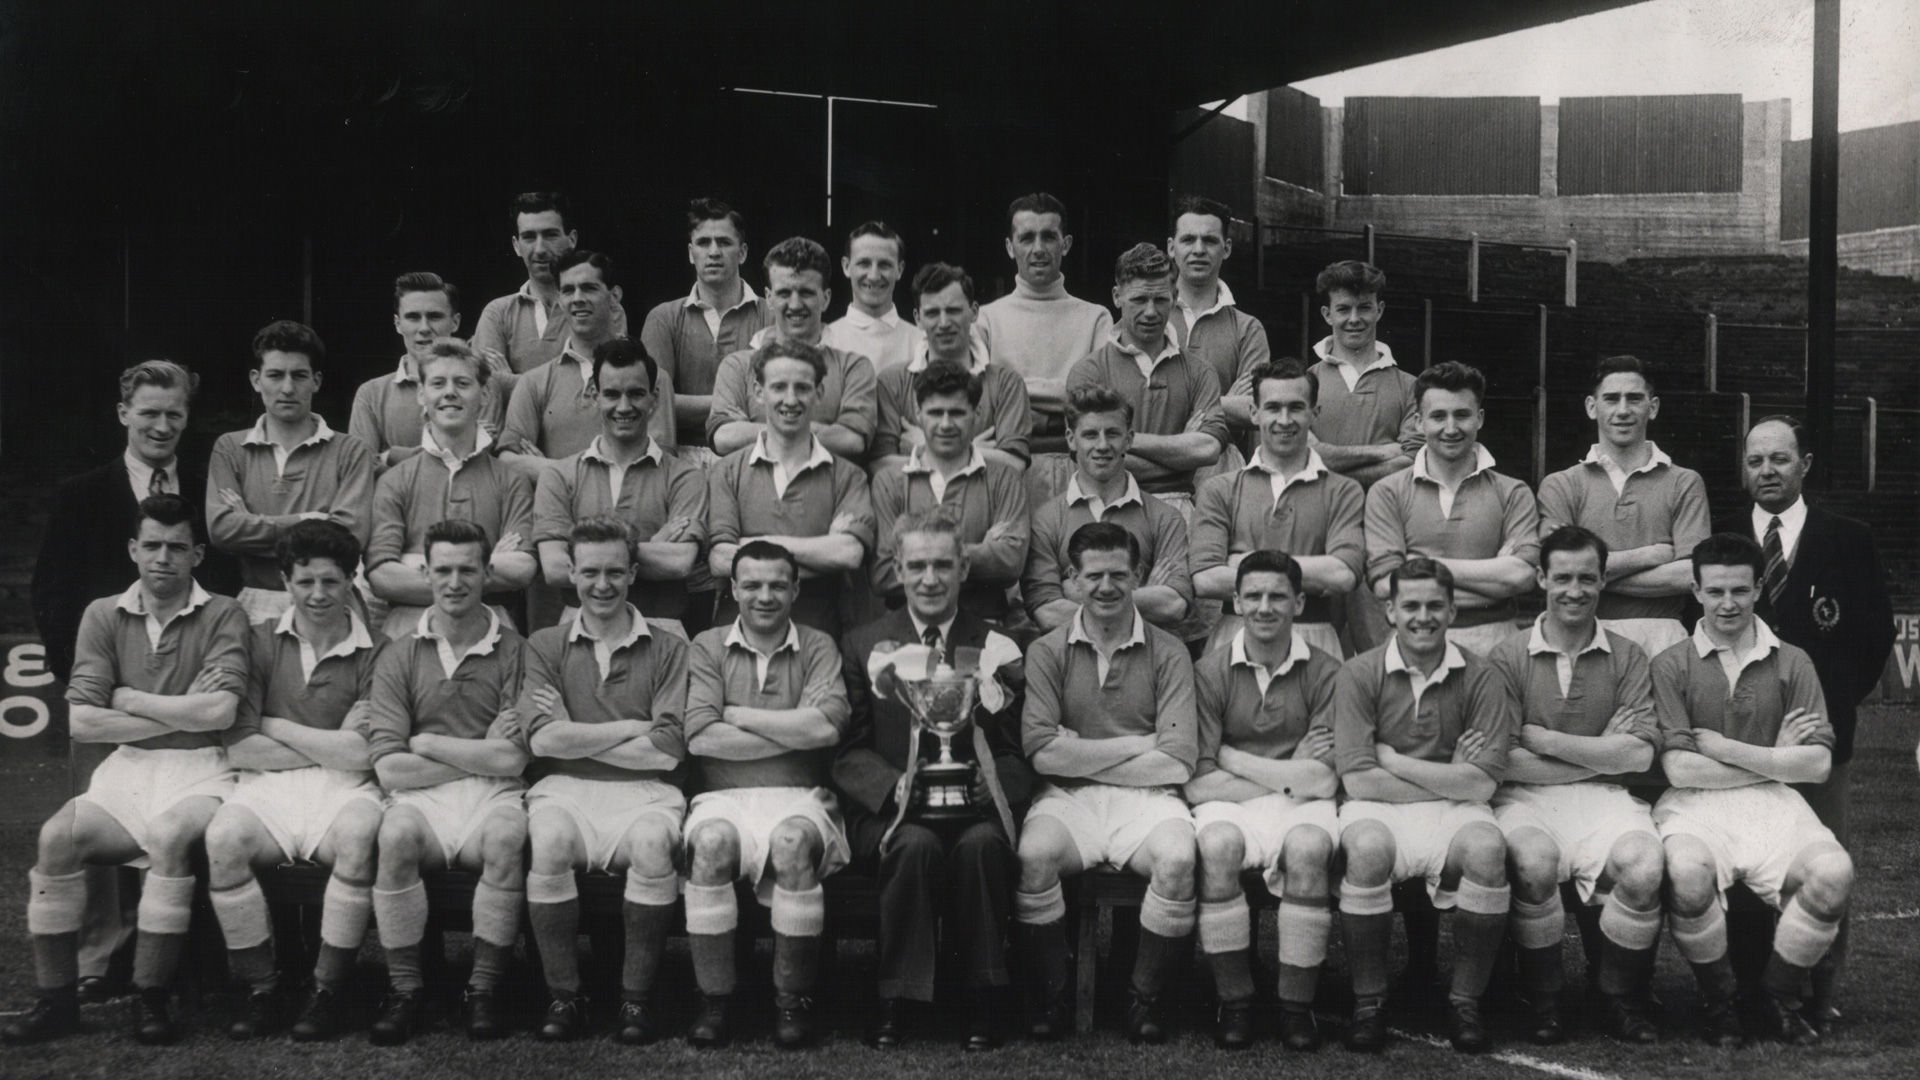 aberdeen 1955 league history champions football club fc cup mad honours scottish meeting 1984 1954 dominated 1881 formed members october